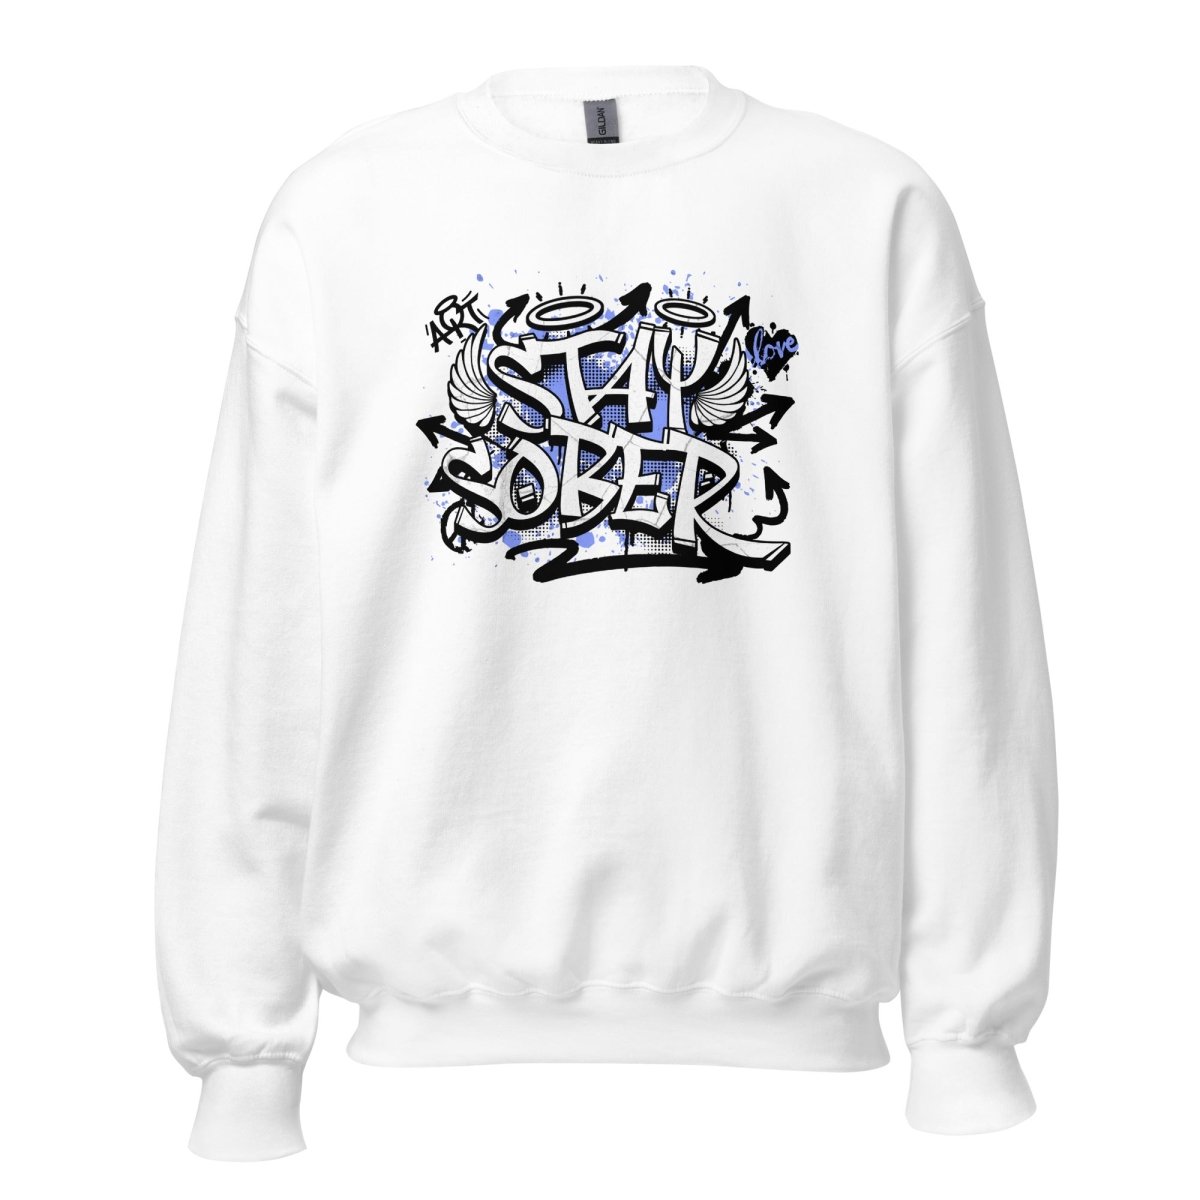 Stay Sober Graffiti Sweater: Embrace Clarity and Empowerment - Sobervation